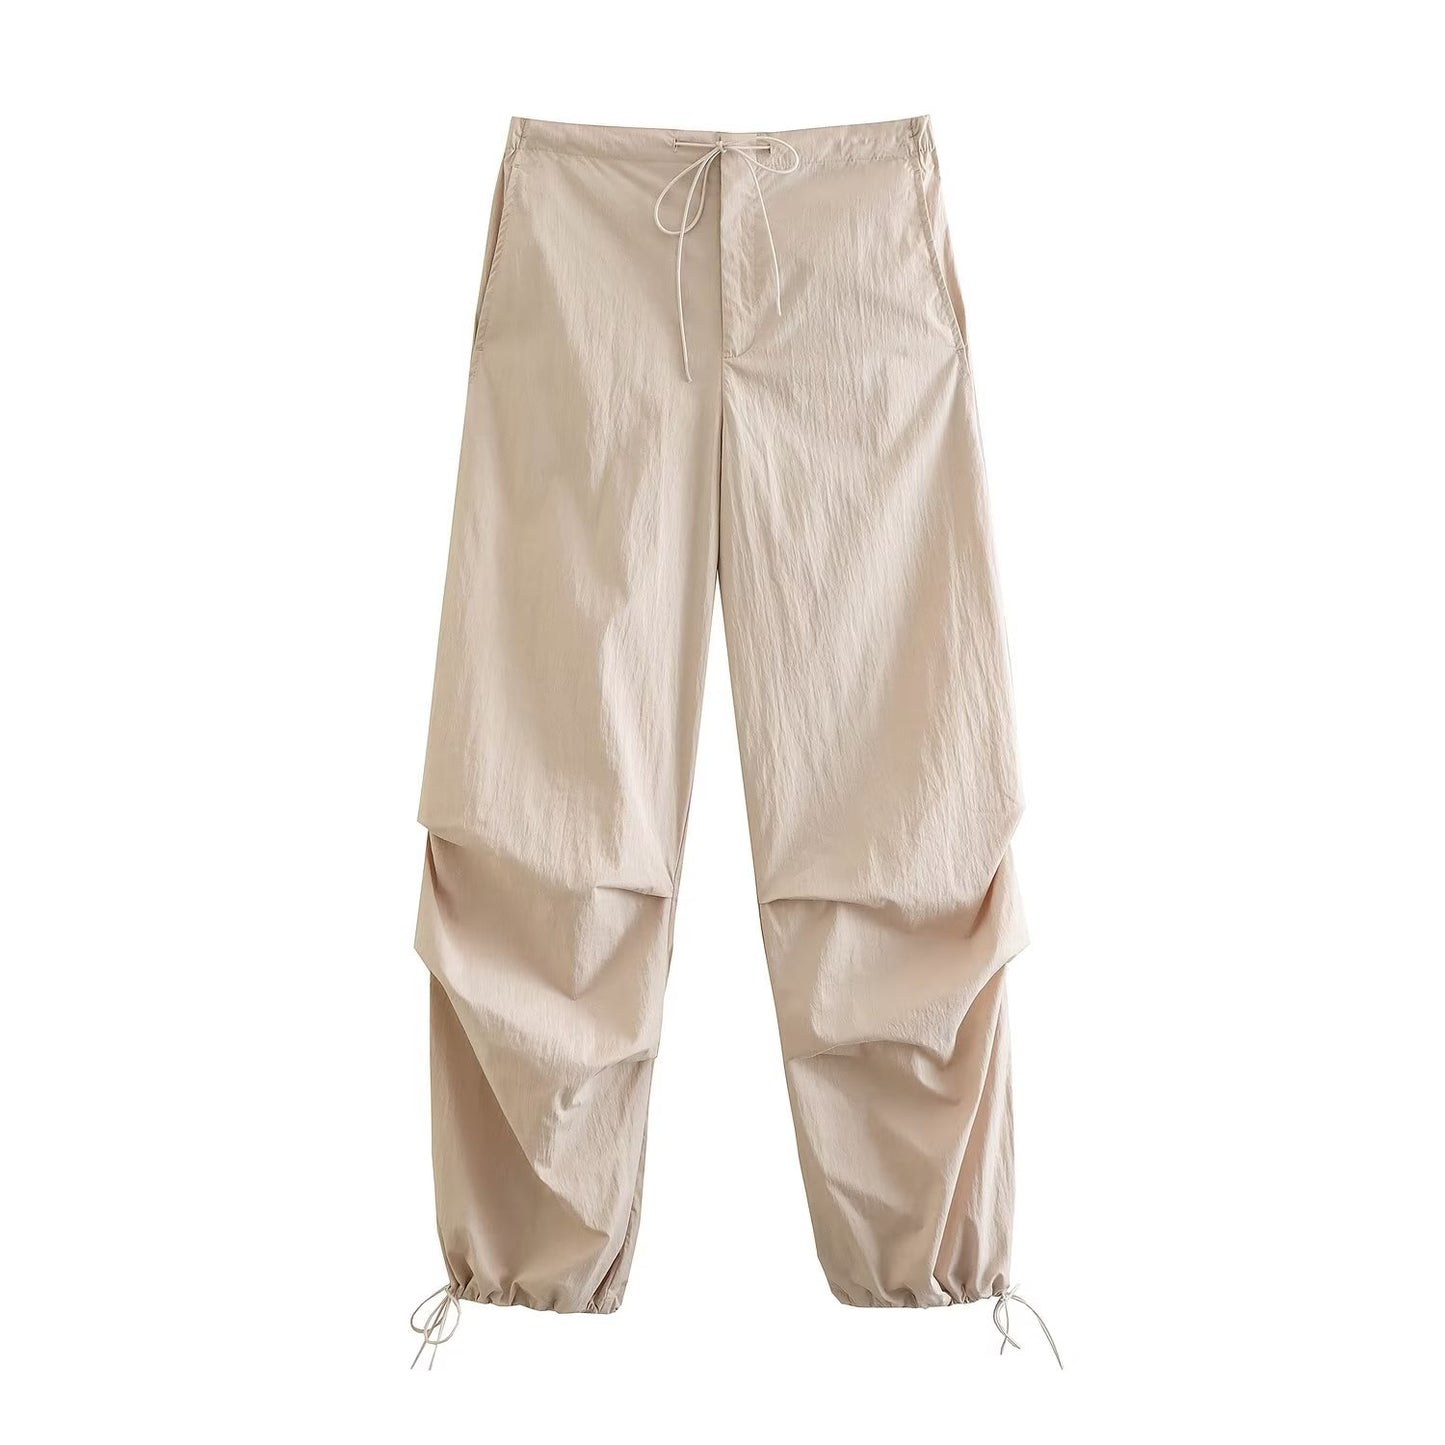 Women's Casual Trousers Pleated Multi-pocket Cargo Pants